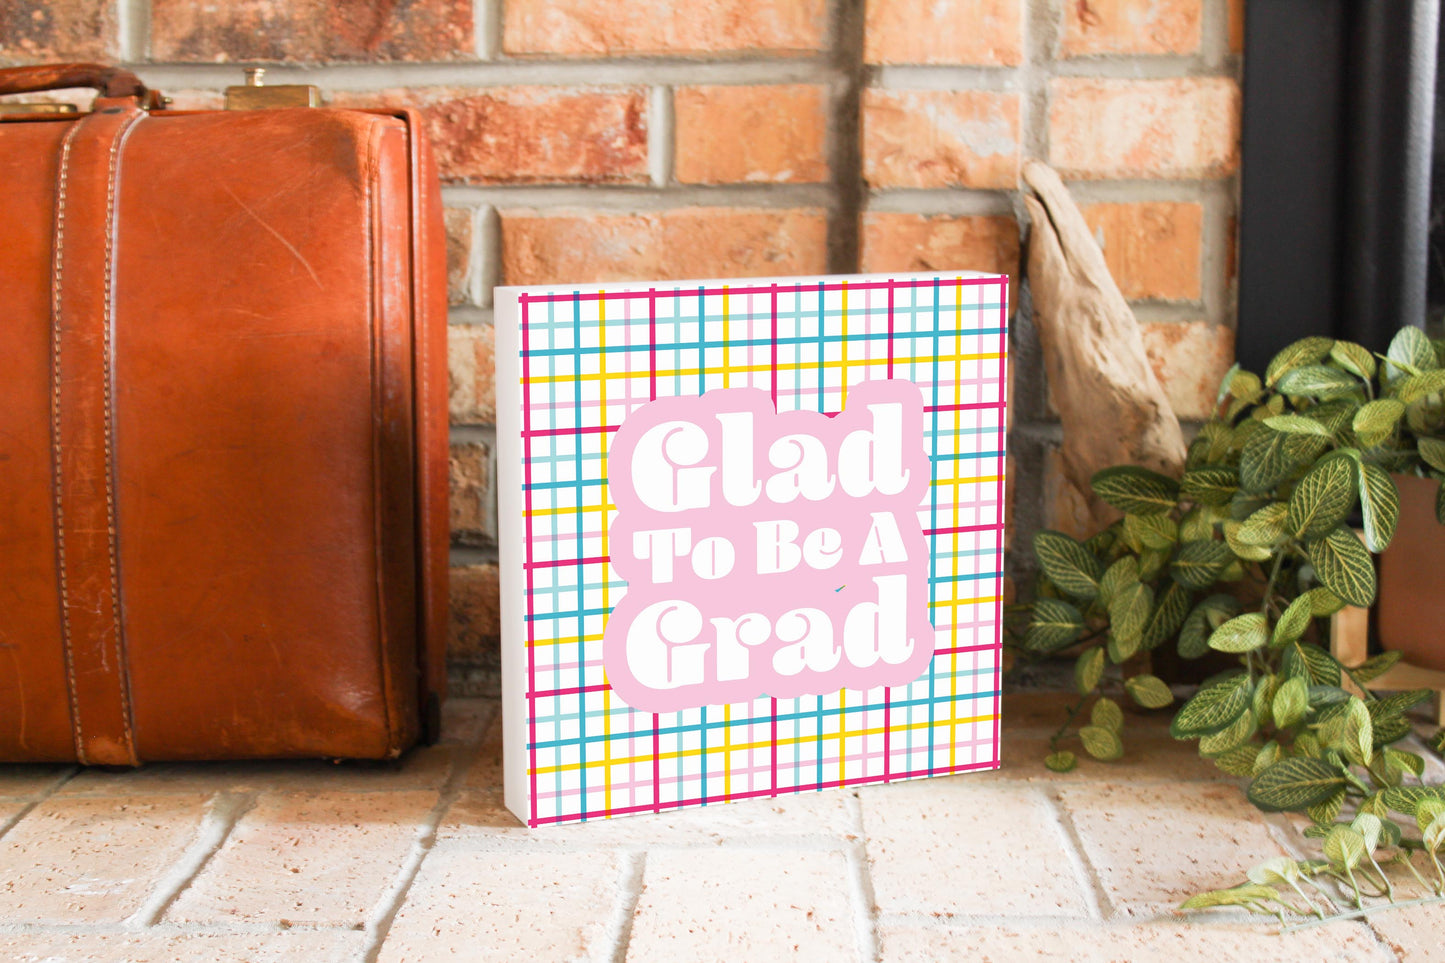 Glad To Be A Grad Colorful Grid | 10x10